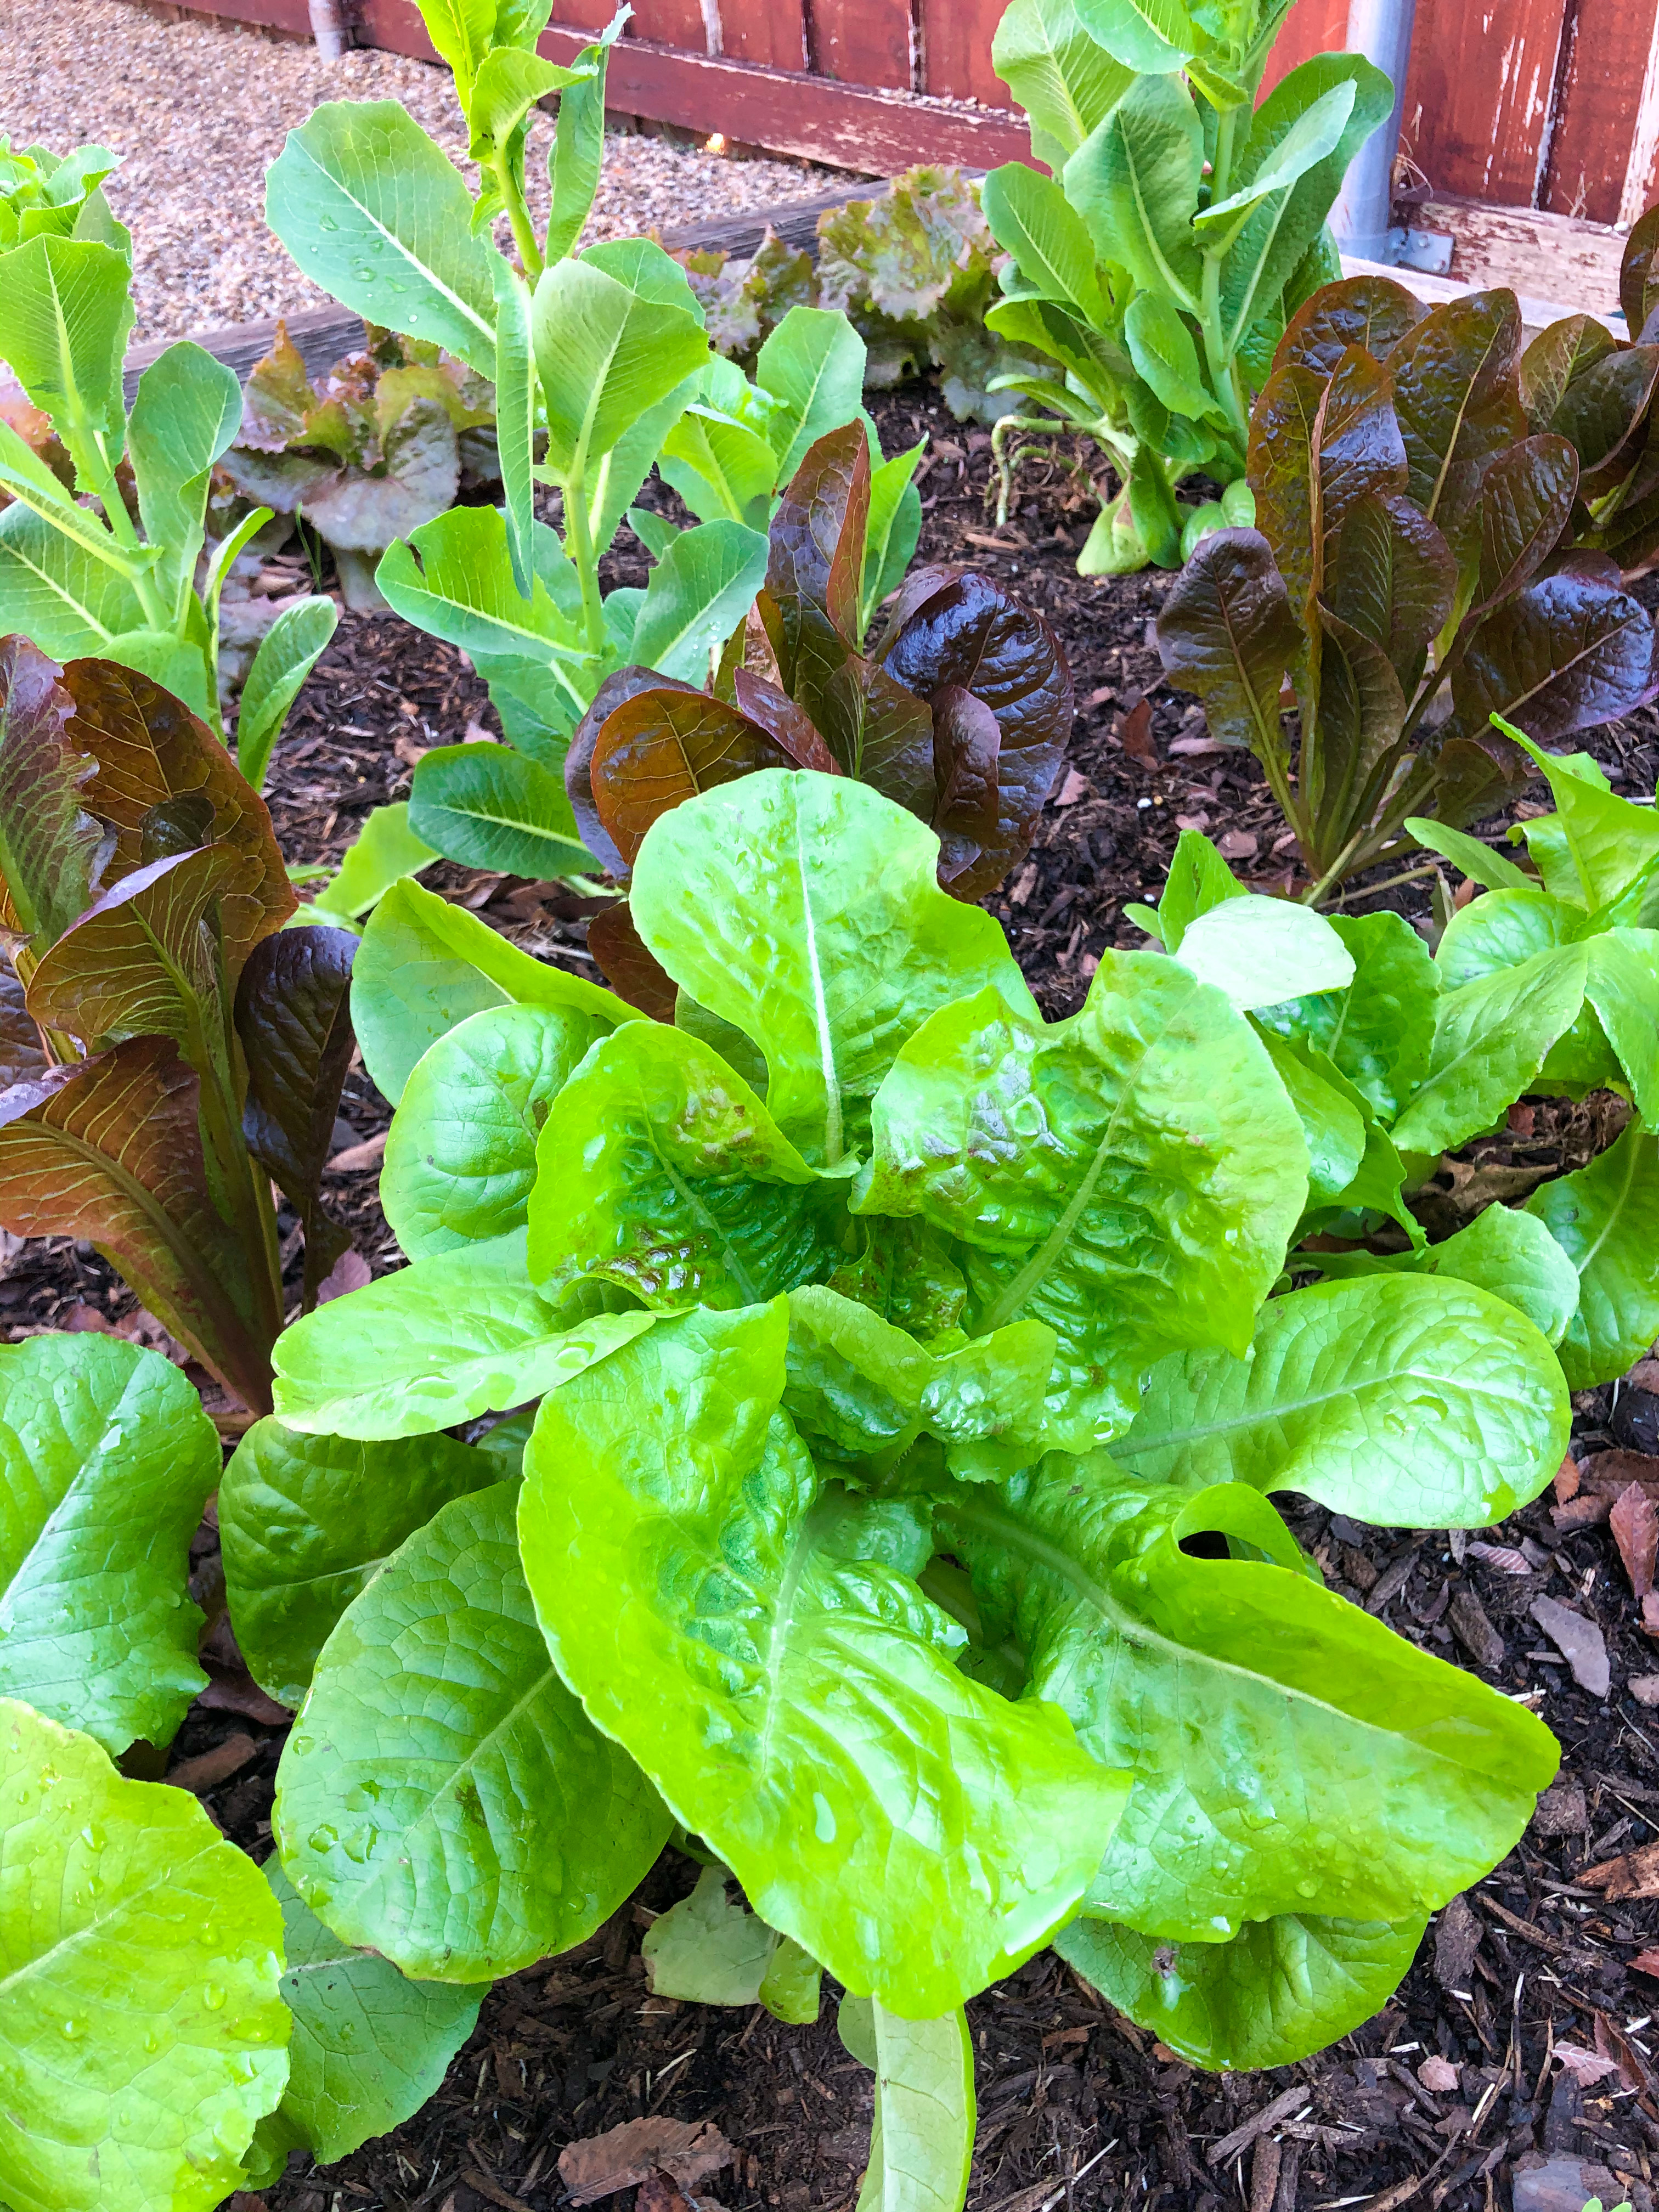 How to Grow Lettuce in Raised Bed Garden, Lettuce Grow Guide